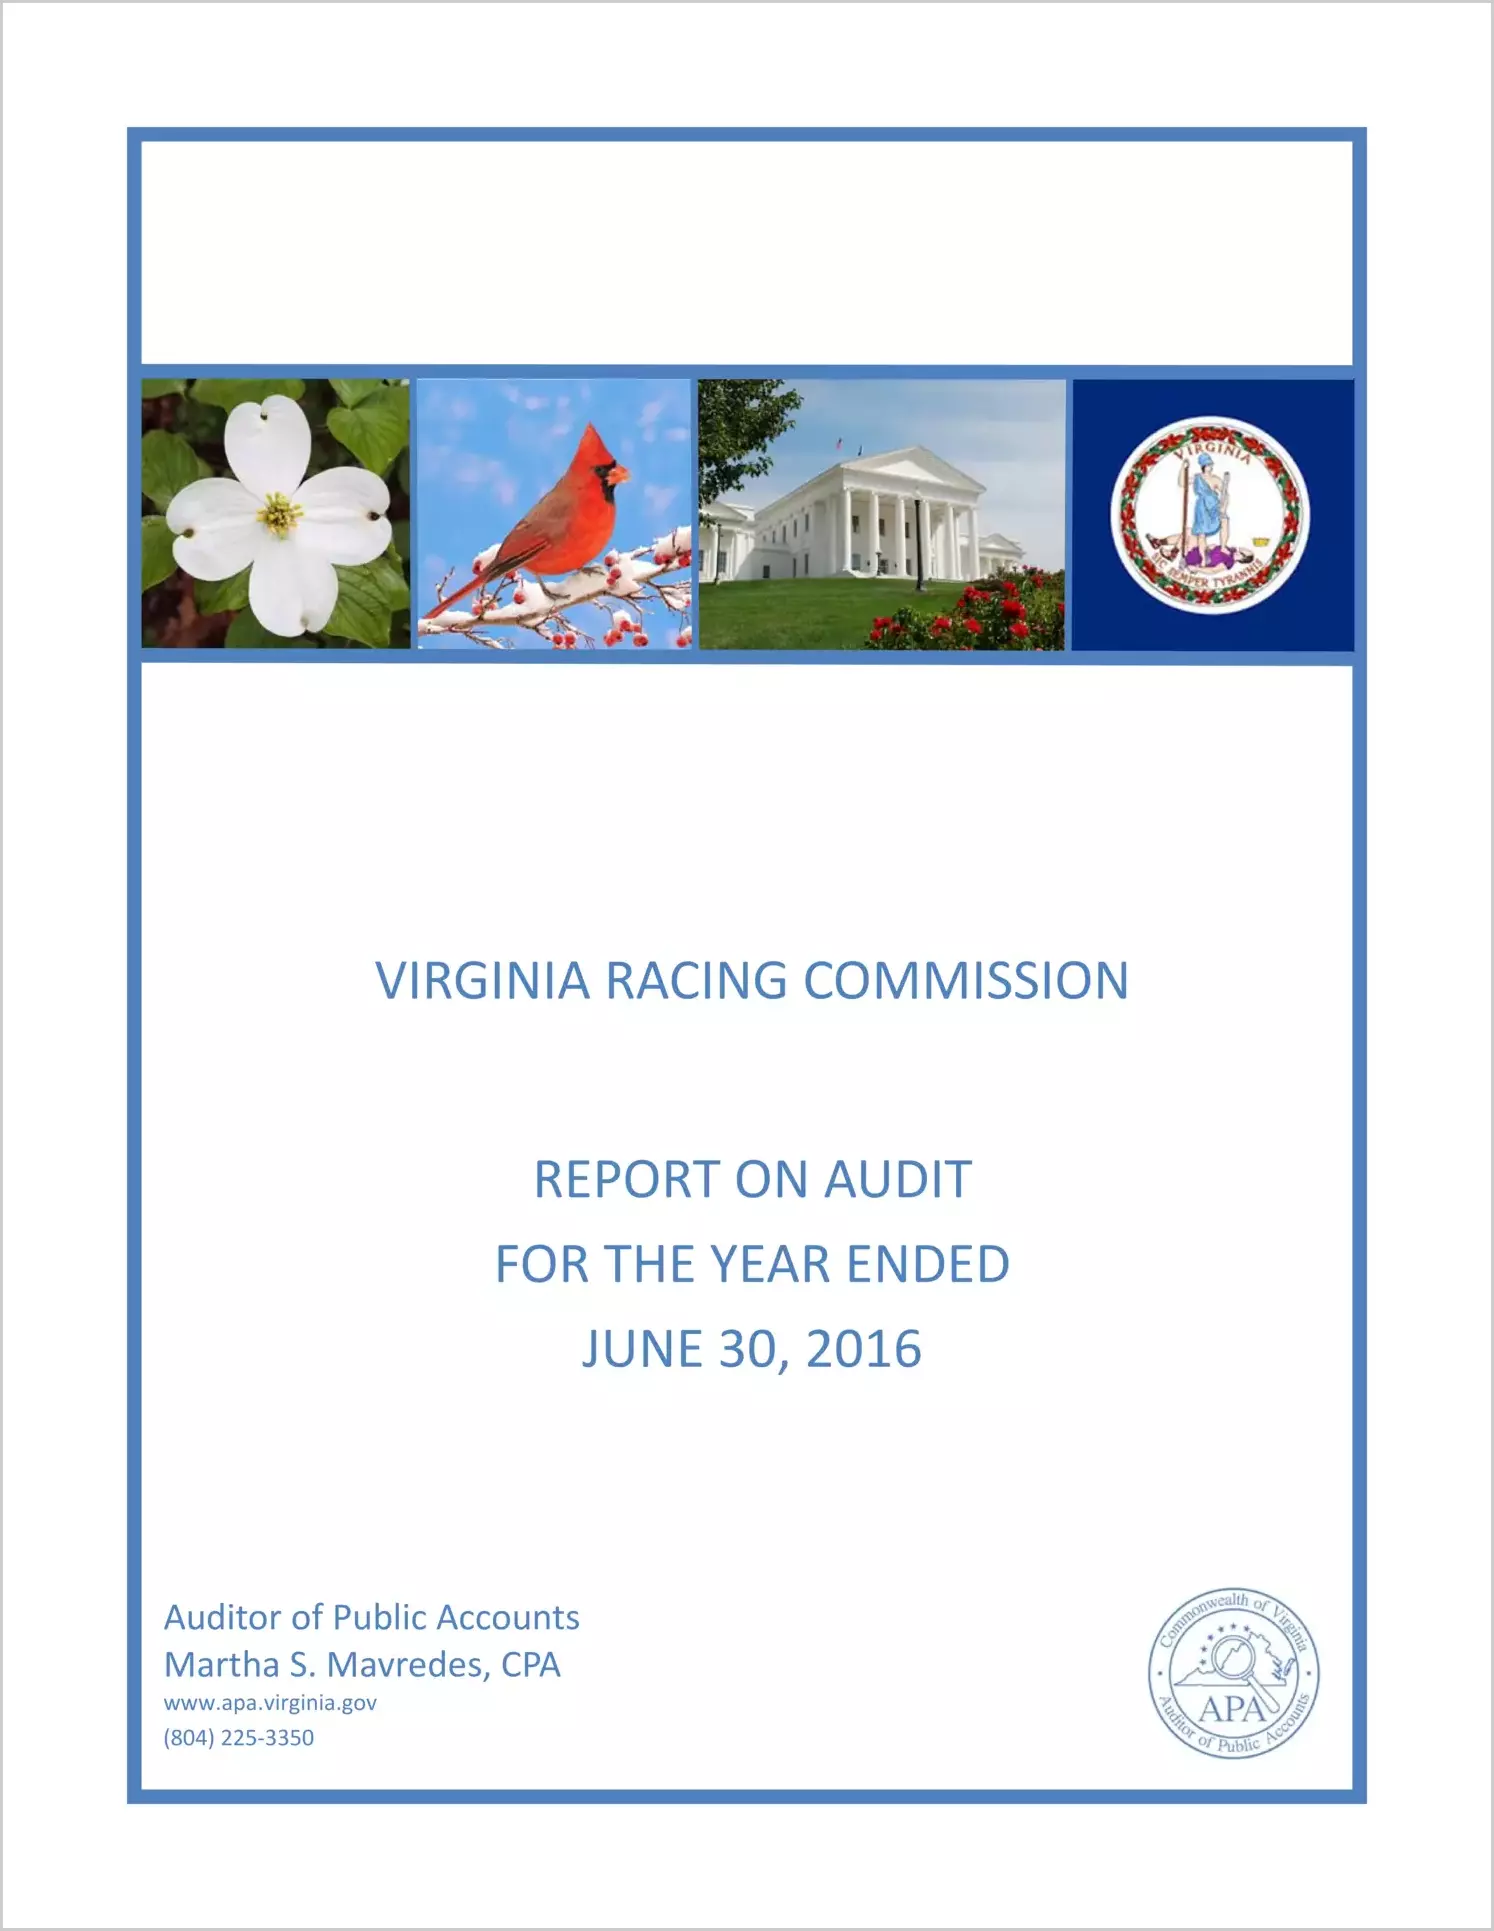 Virginia Racing Commission for the year ended June 30, 2016